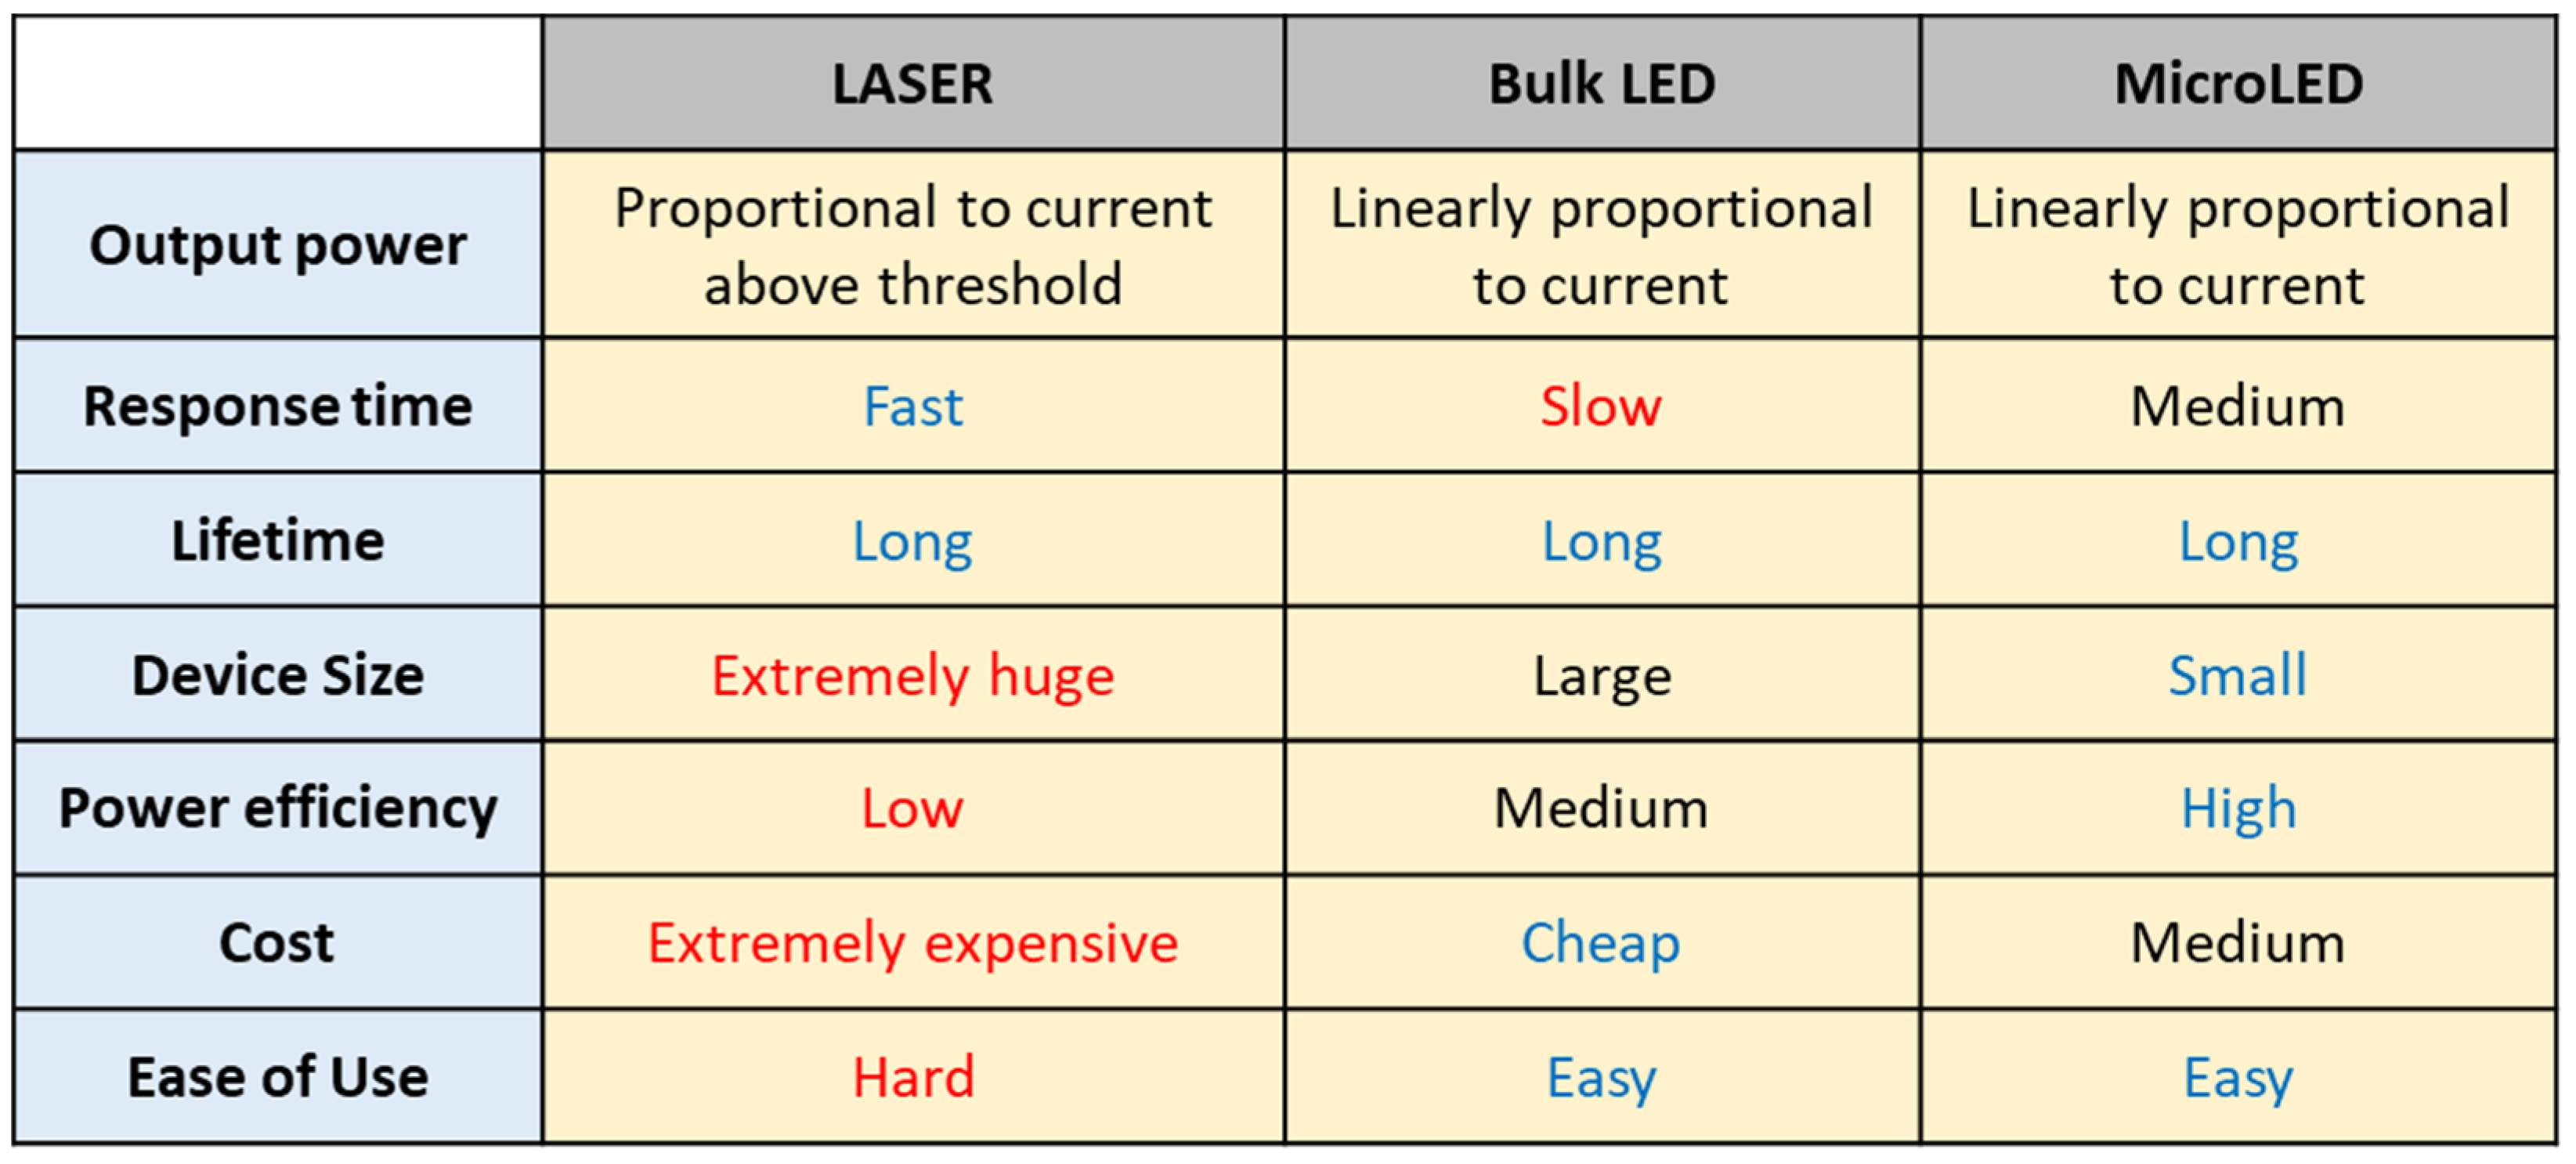 Types of LED light-emitting diodes by color enlightening Blue